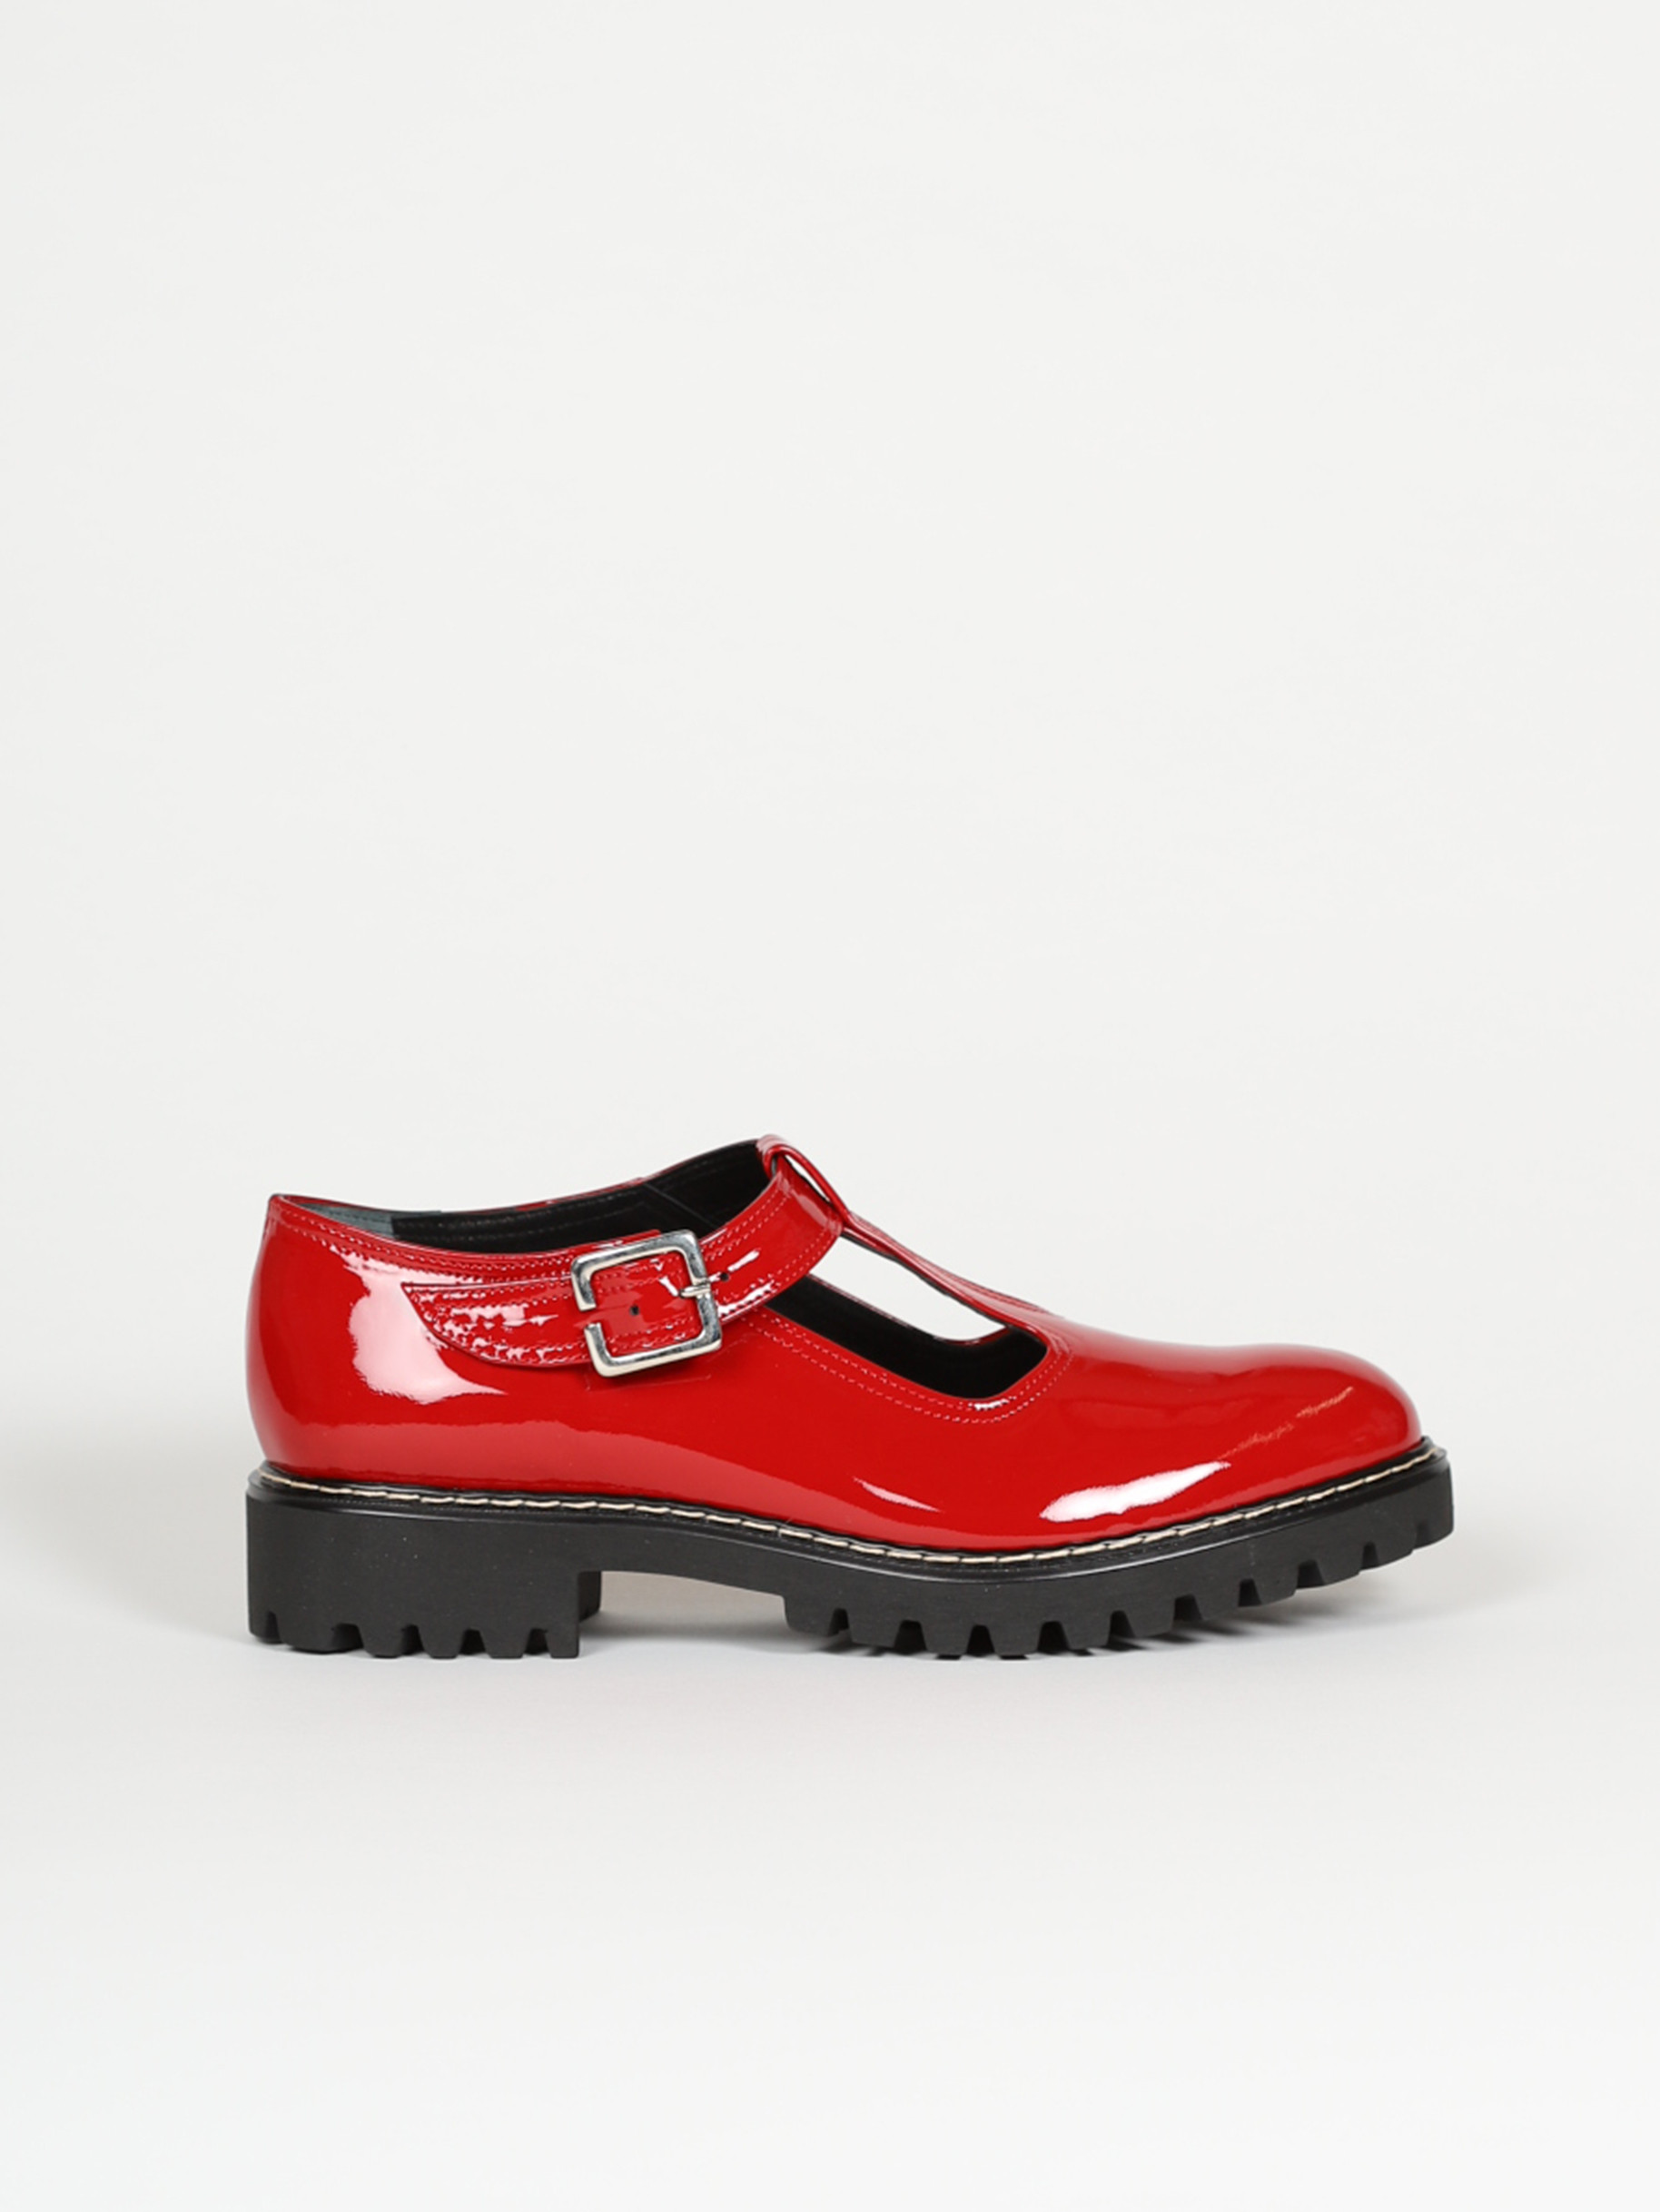 red patent mary jane shoes